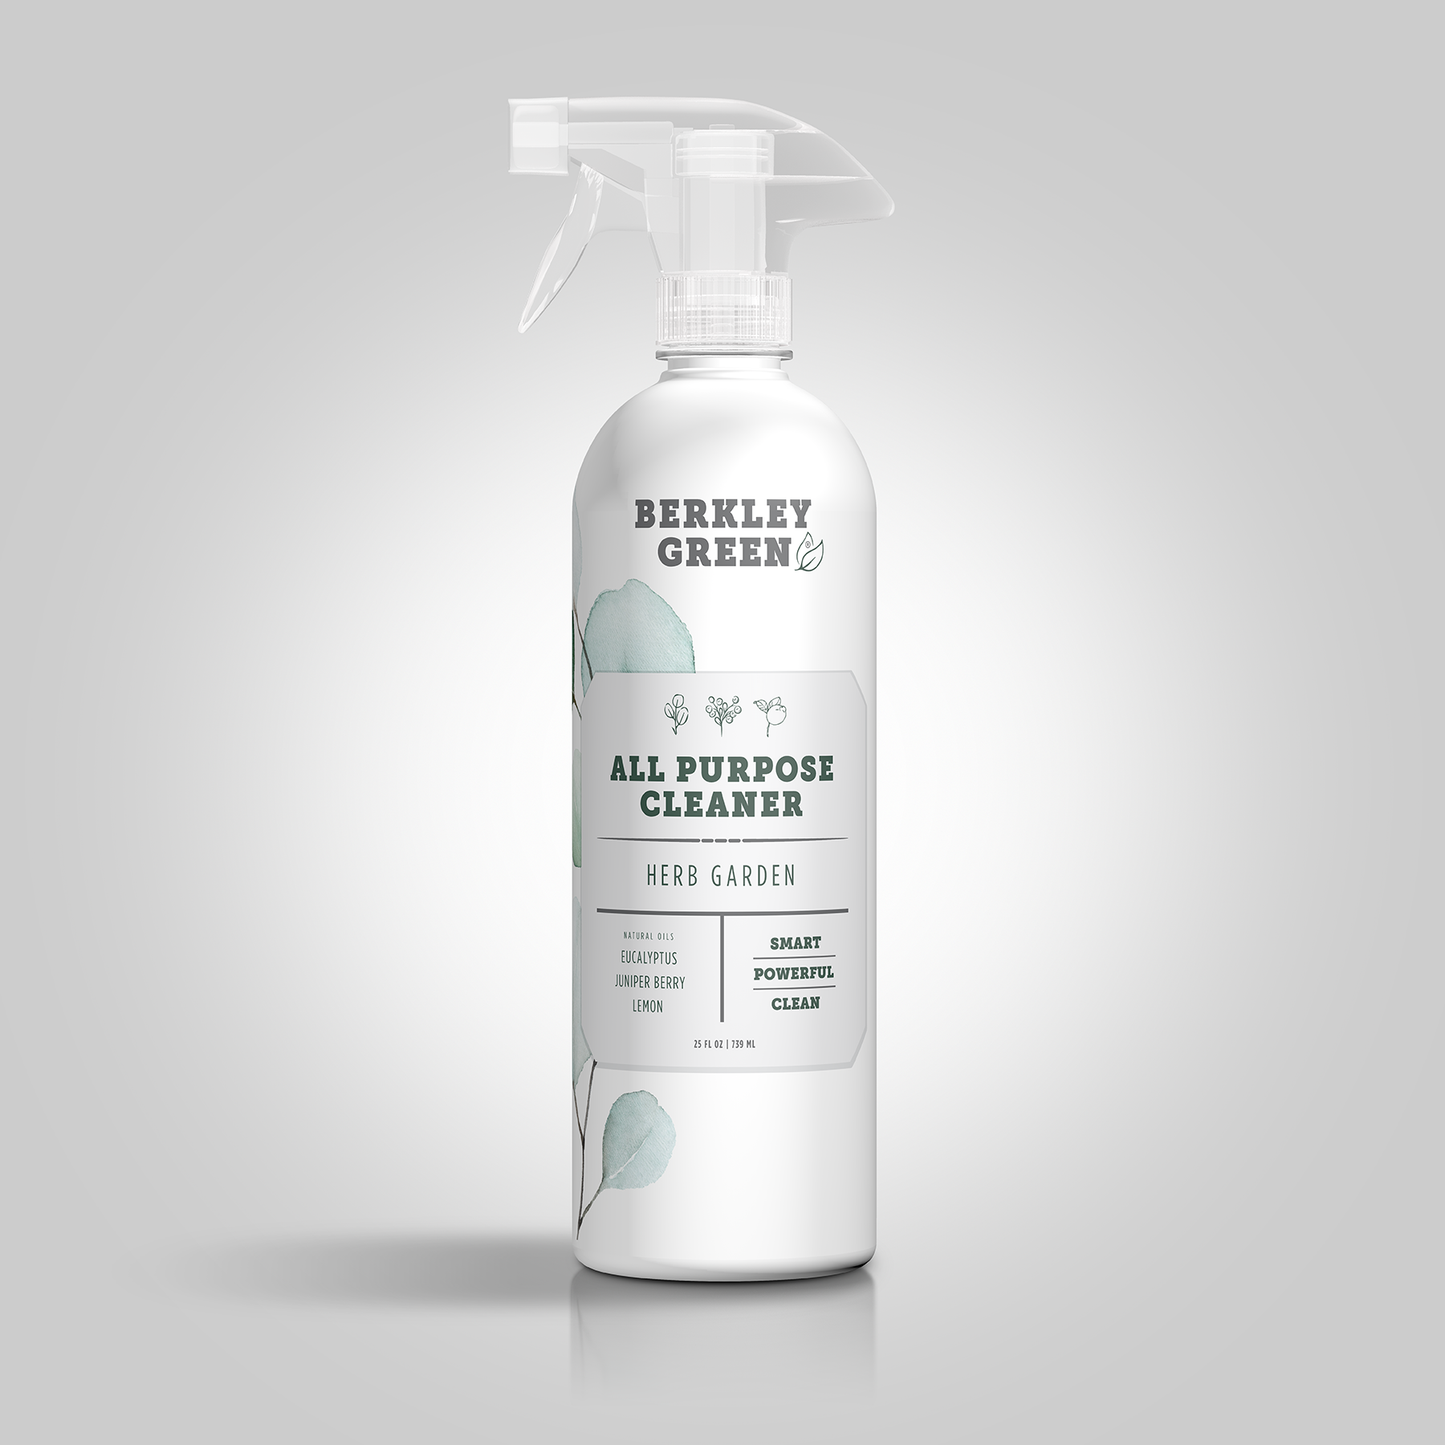 All Purpose Cleaner (HG)